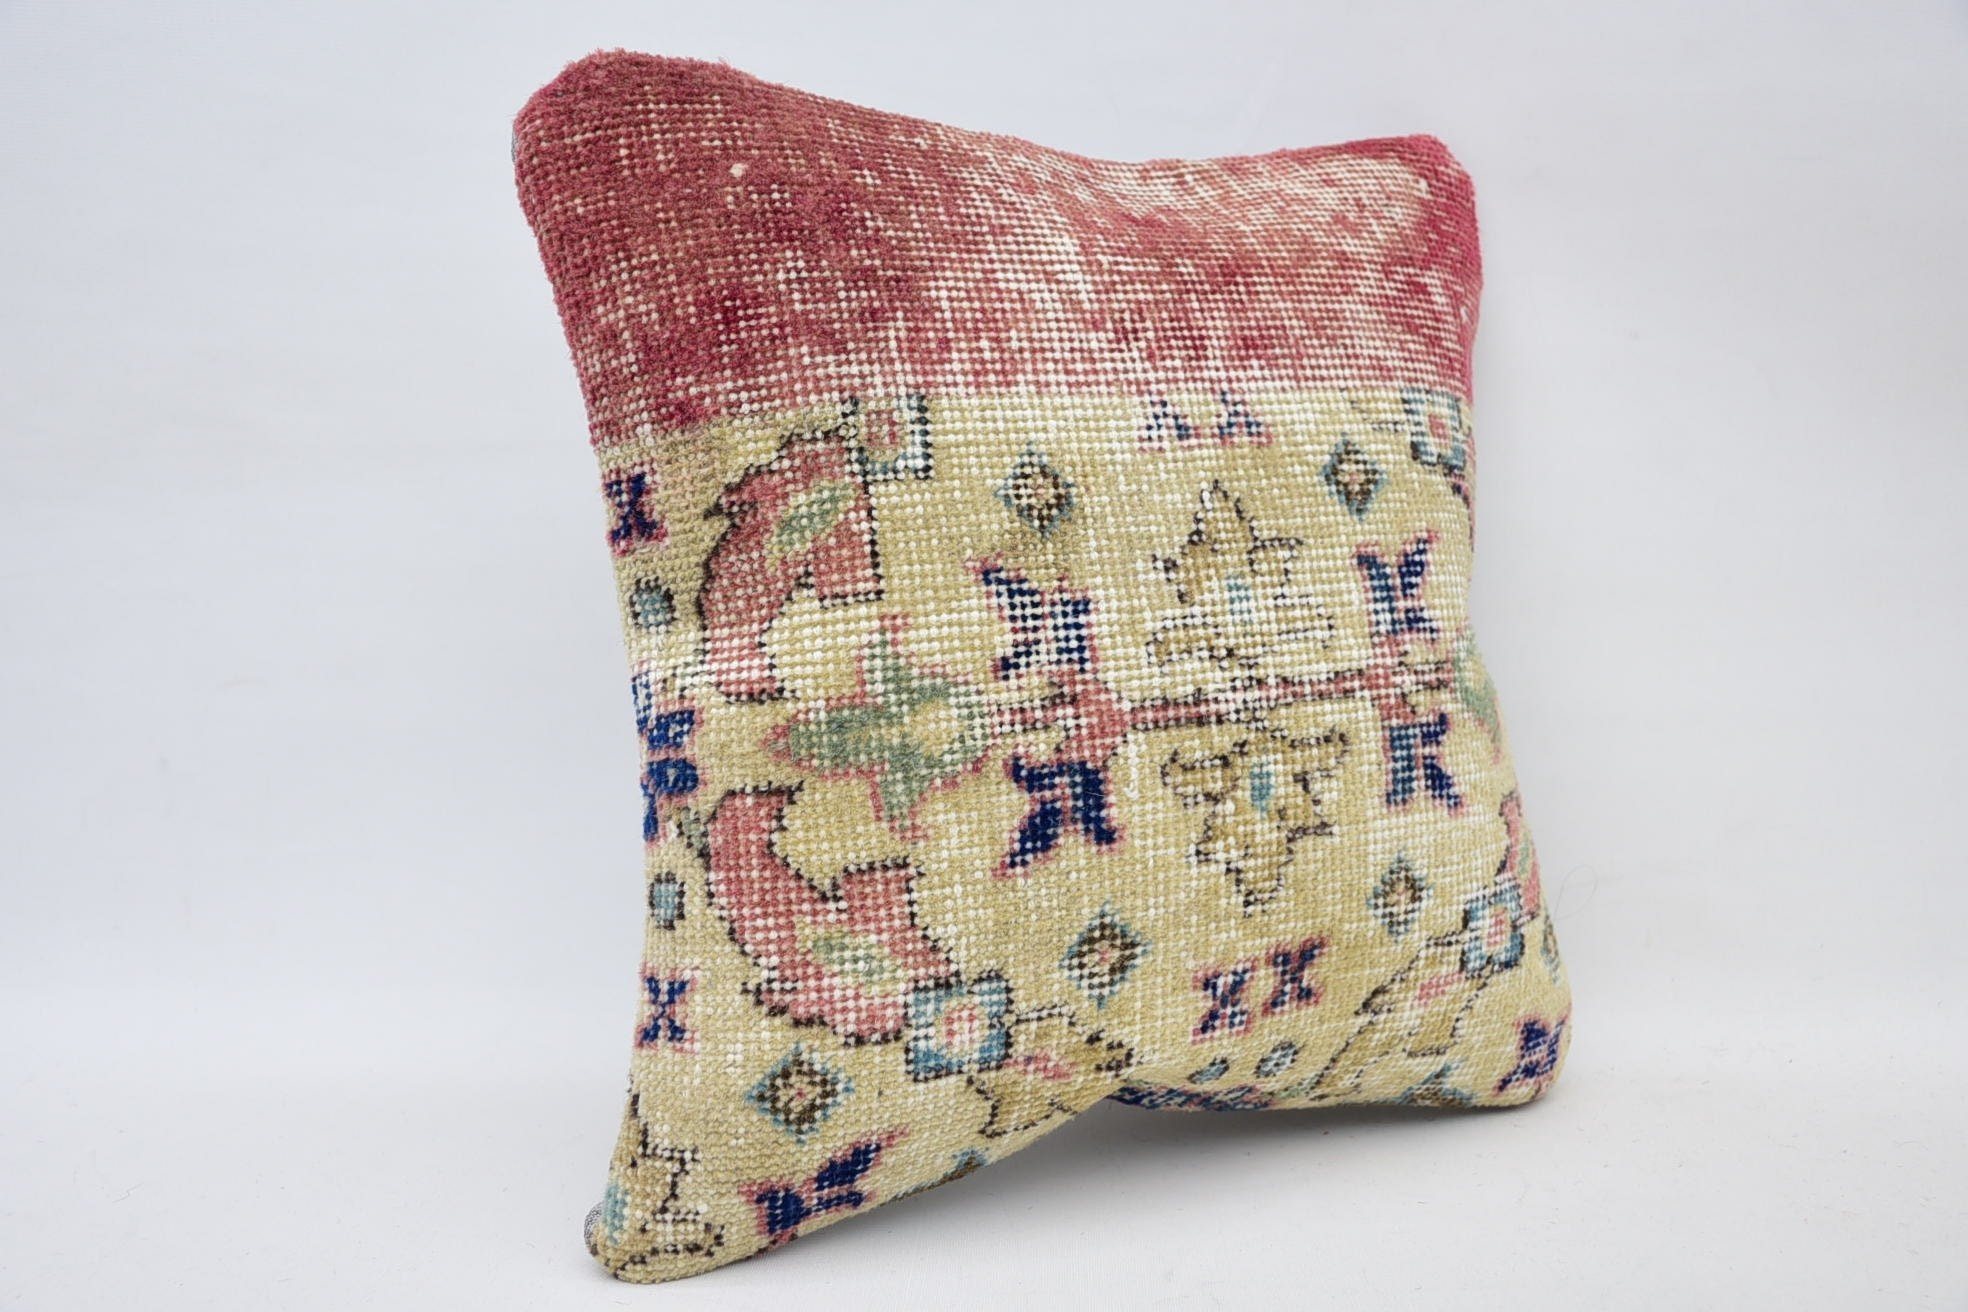 Kilim Pillow, Pillow for Couch, Sofa Bolster Cushion Cover, Vintage Kilim Throw Pillow, 14"x14" Beige Pillow Cover